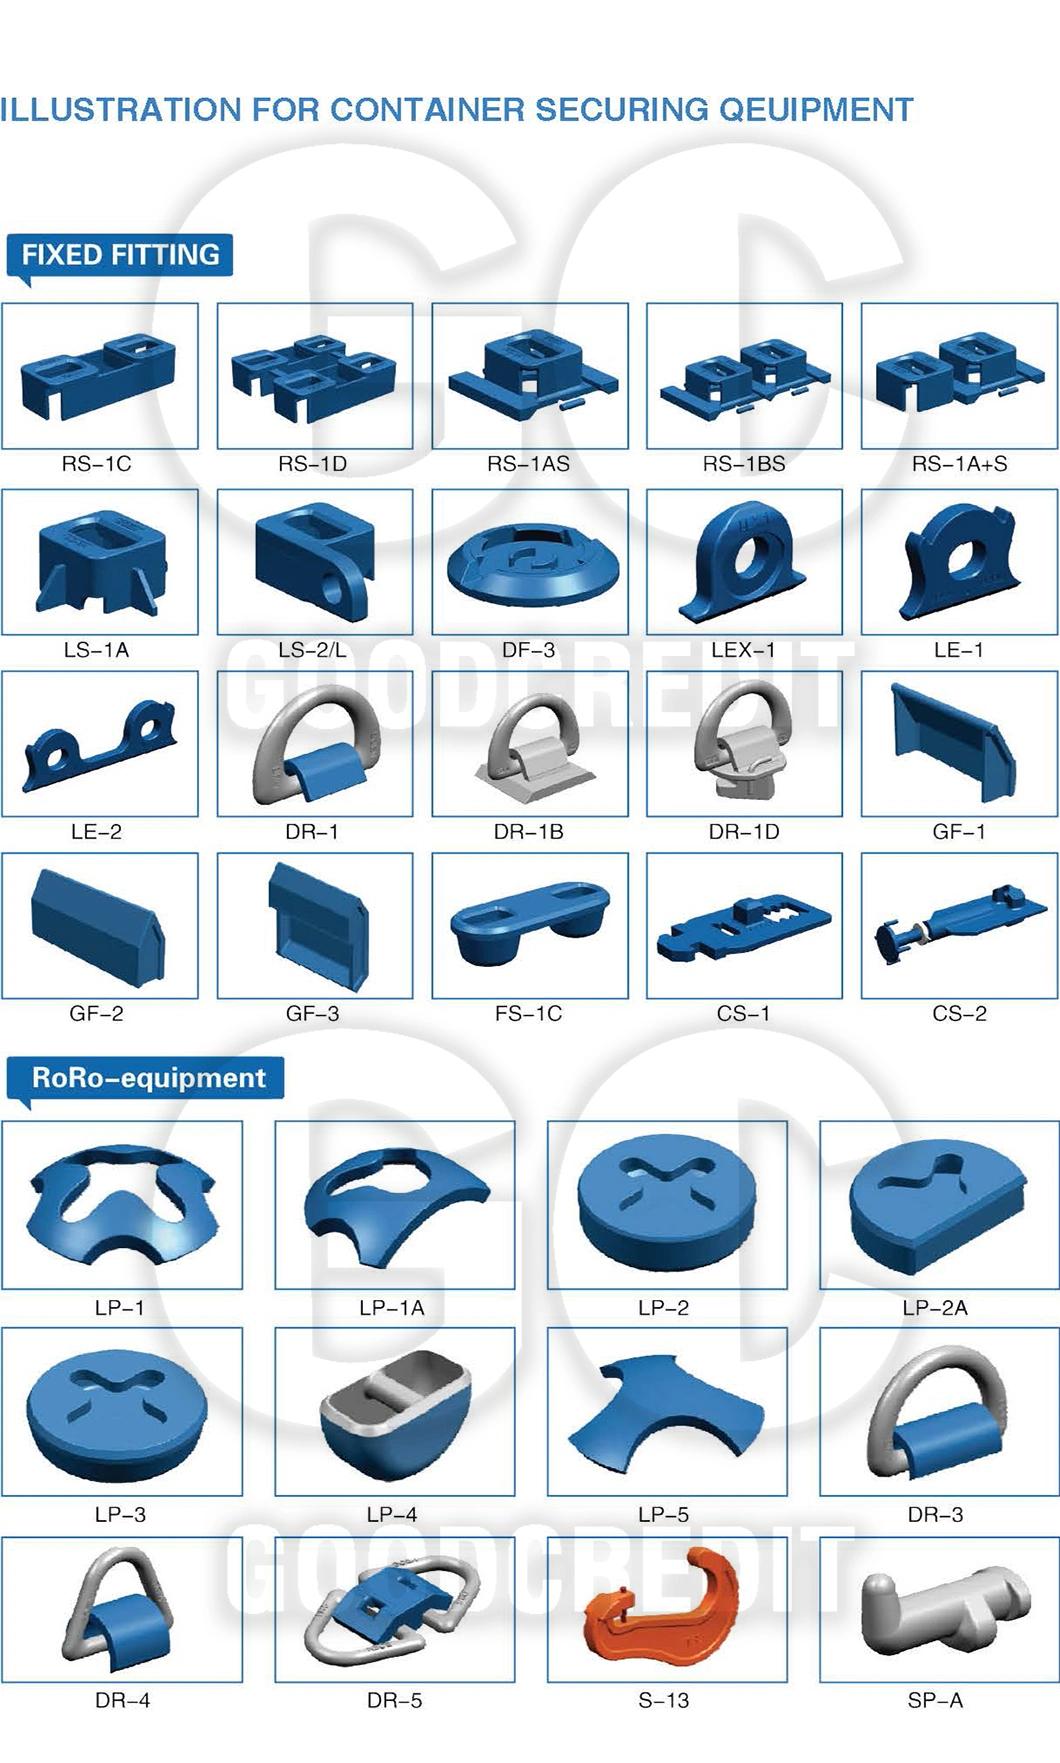 Container Accessories ISO 1161 Standard Container Corner Castings